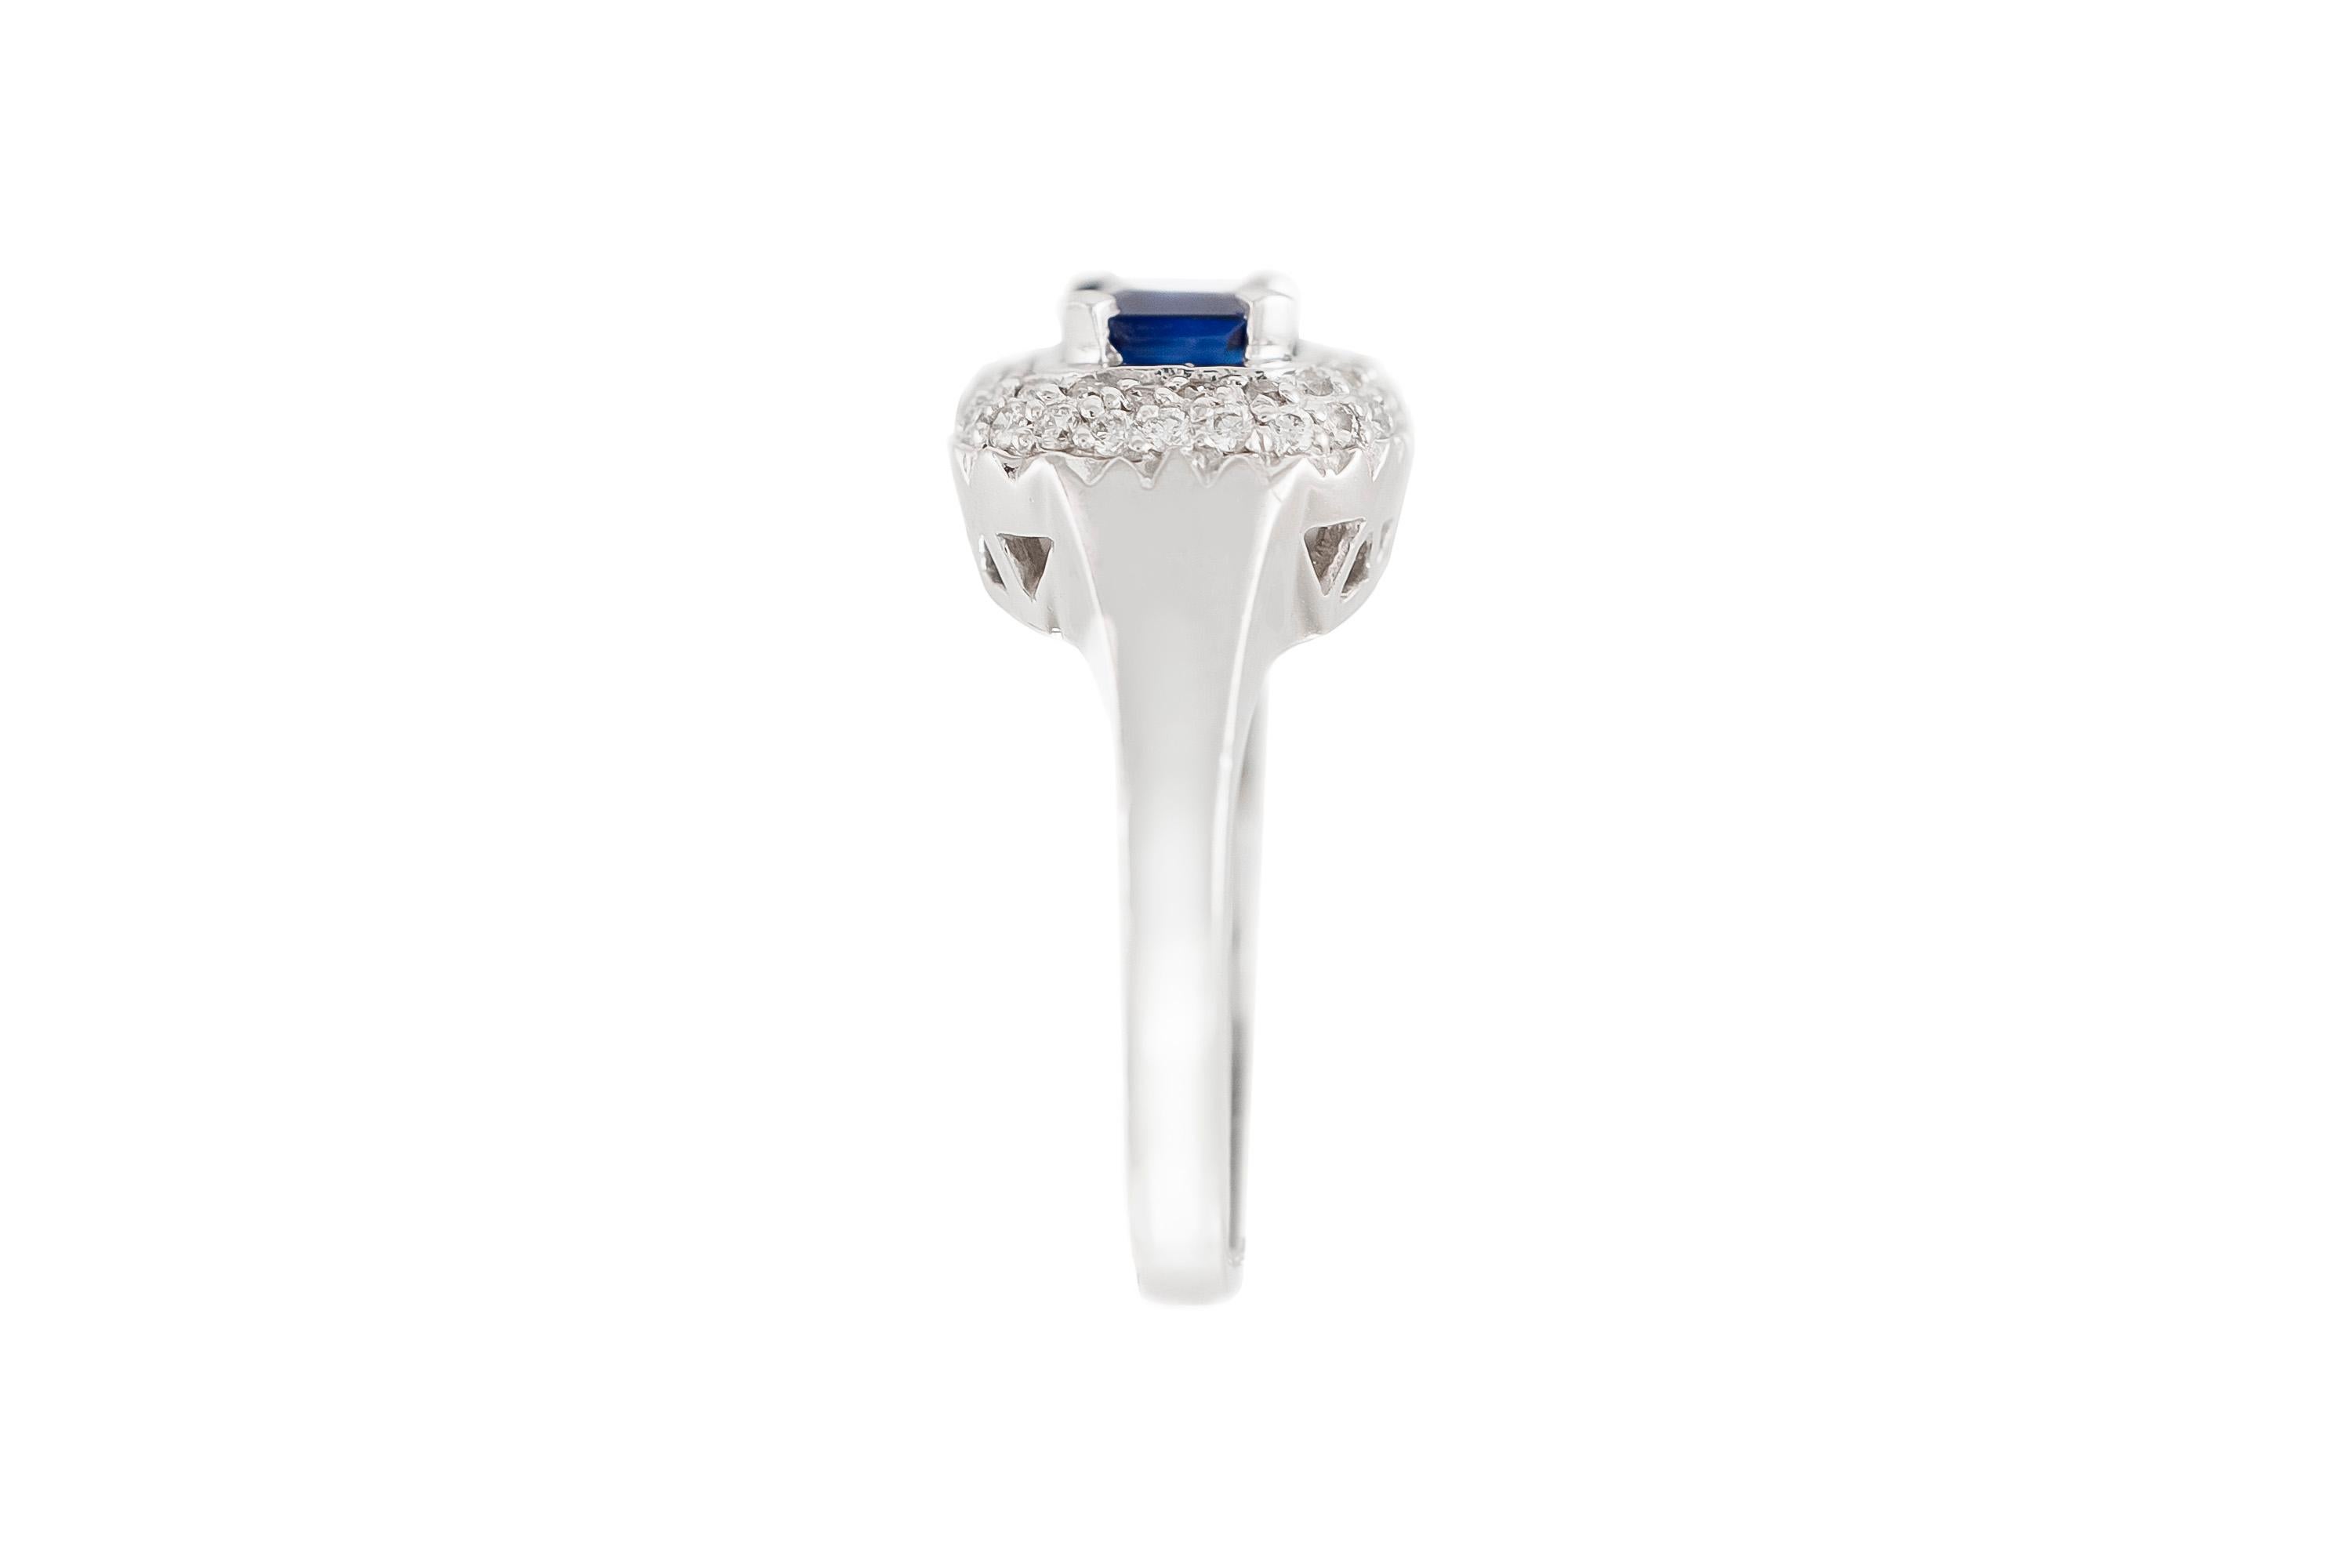 The ring is finely crafted in 18k white gold with center sapphire weighing approximately total of 1.60 carat and diamonds weighing approximately total of  0.80 carat.
Circa 1970.